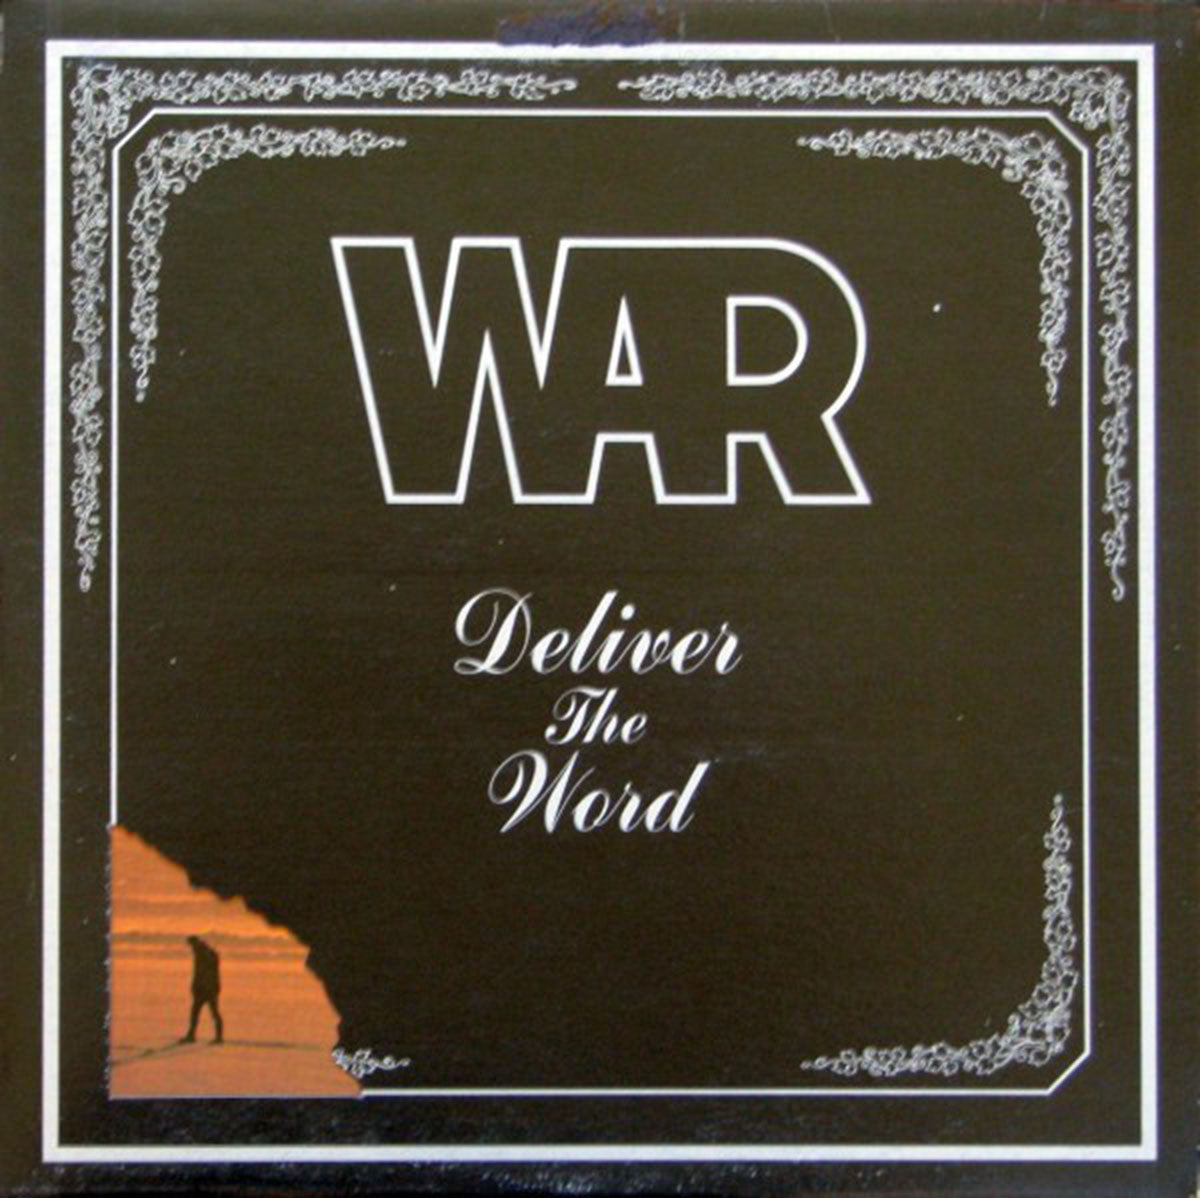 War ‎– Deliver The Word - 1973 Pressing